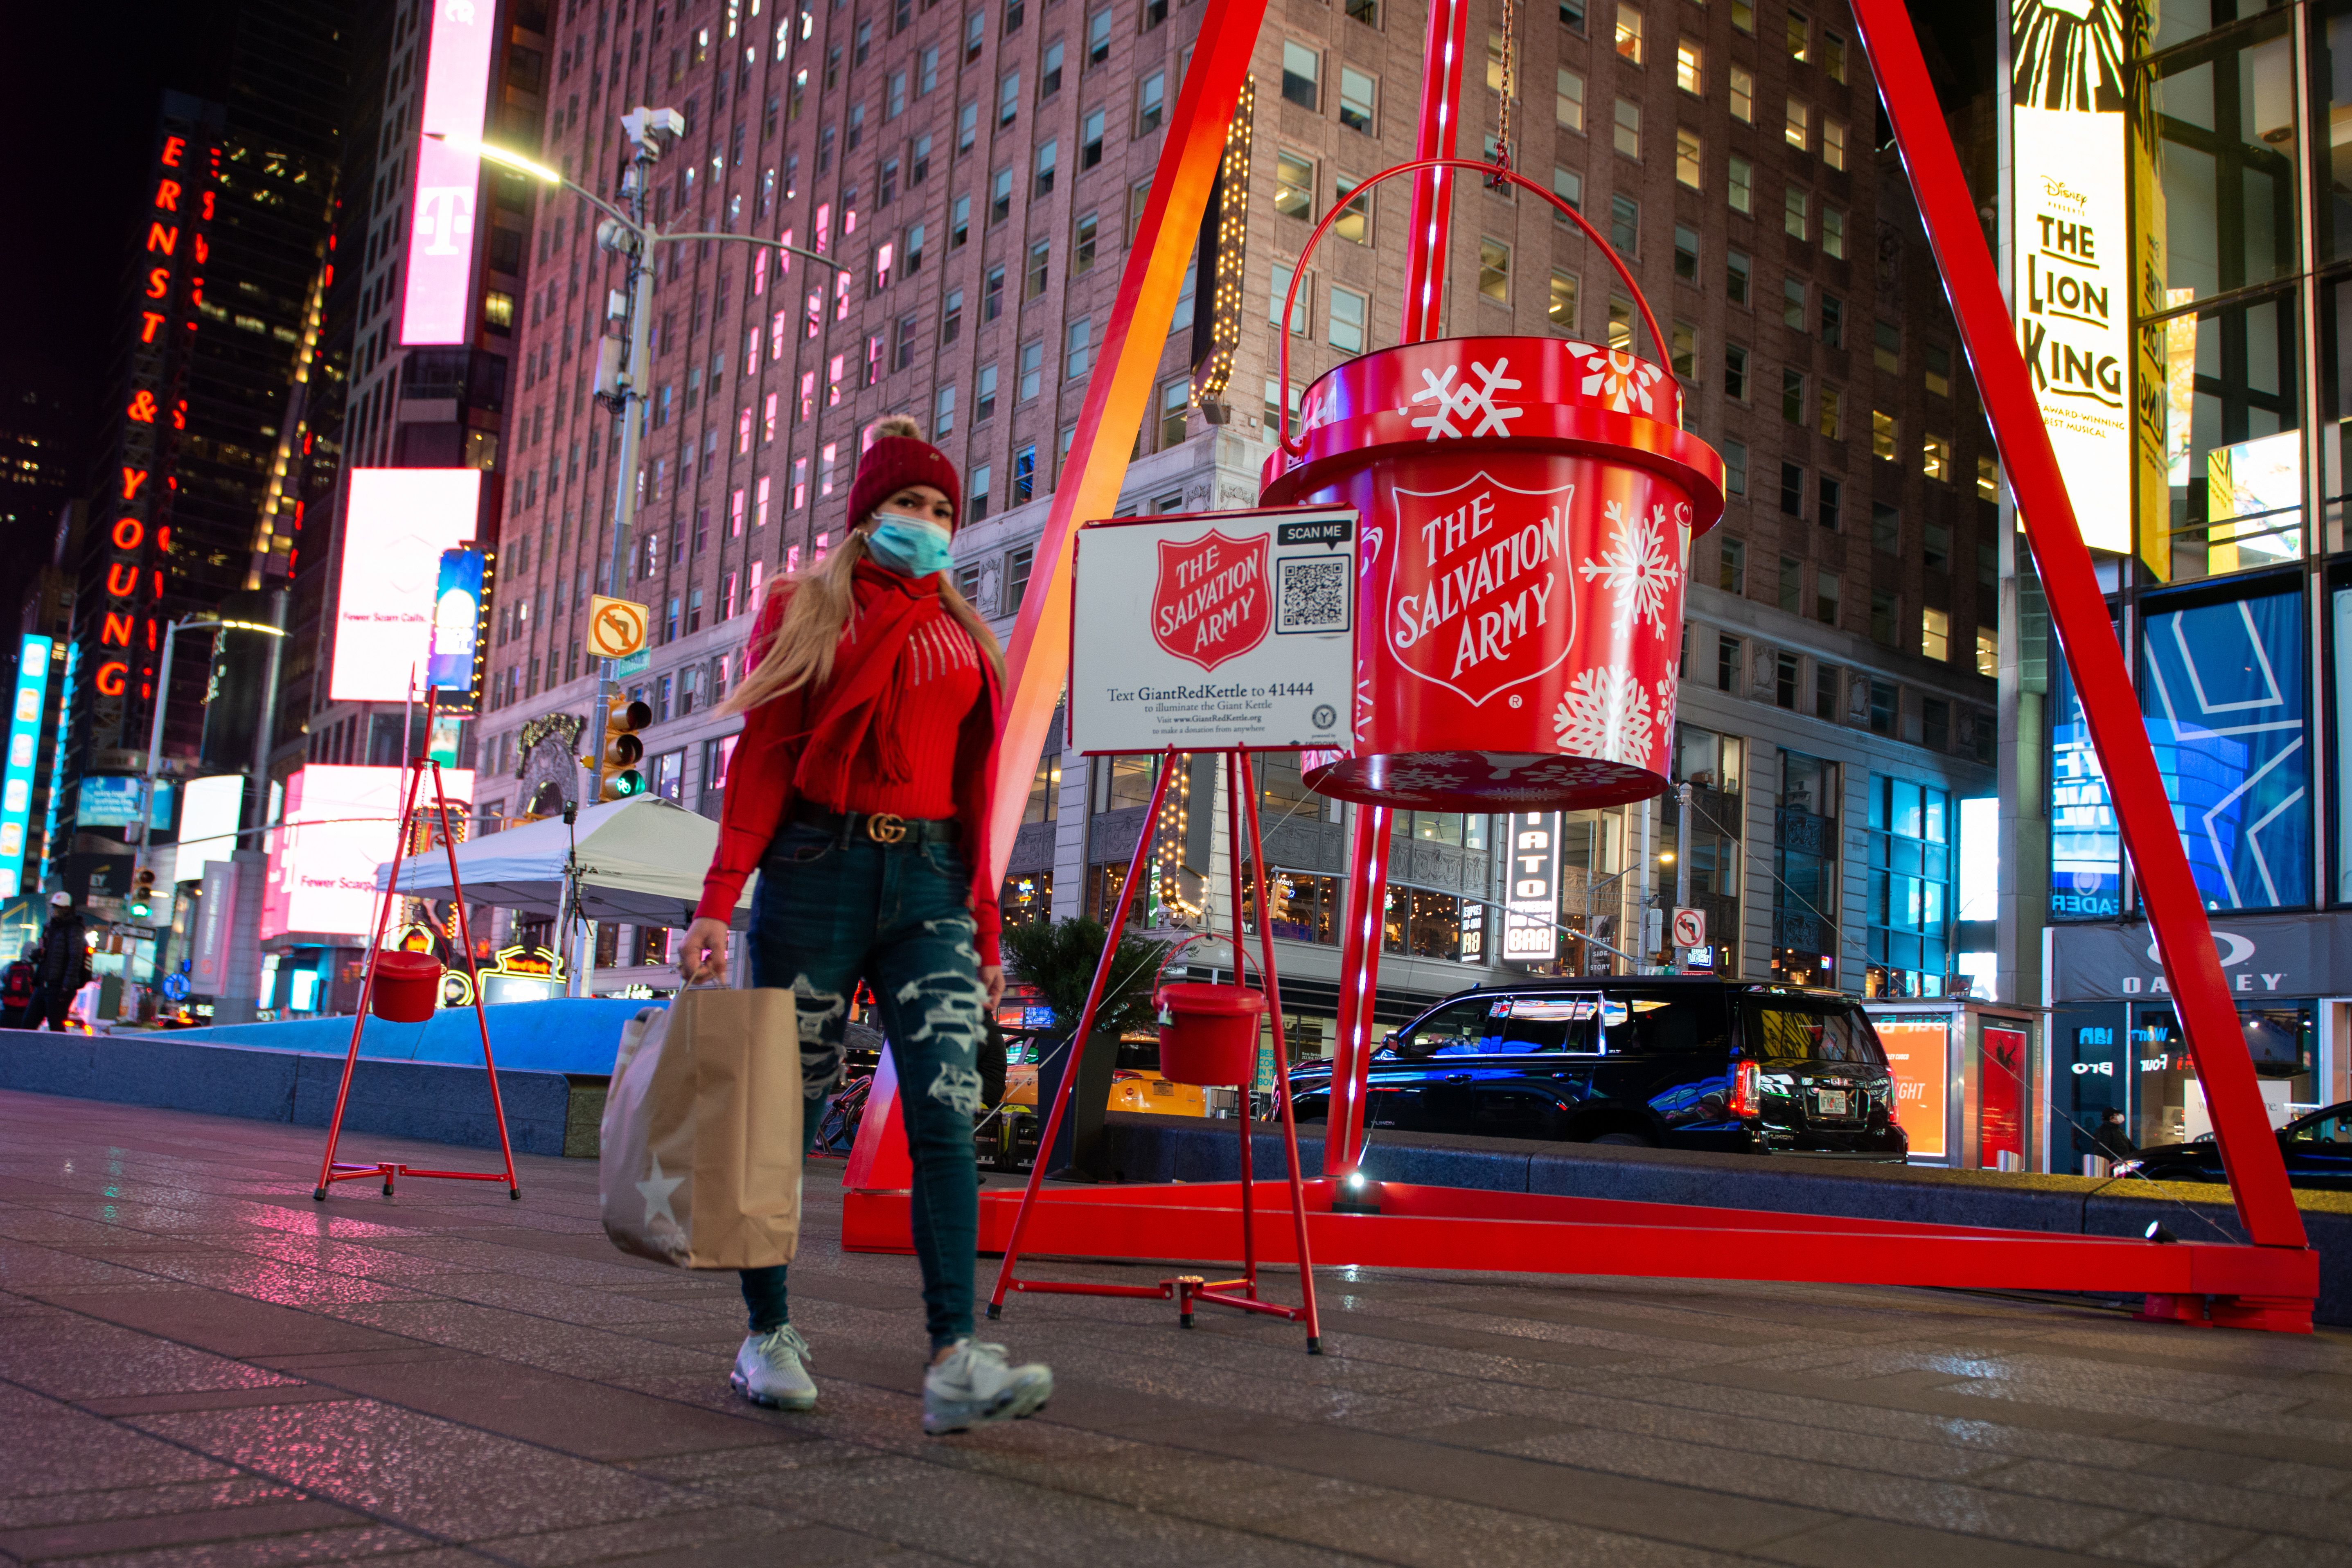 A woman wearing a mask walks past The Salvation Army's Giant Red Kettle in Times Square on December 02, 2020 in New York City.